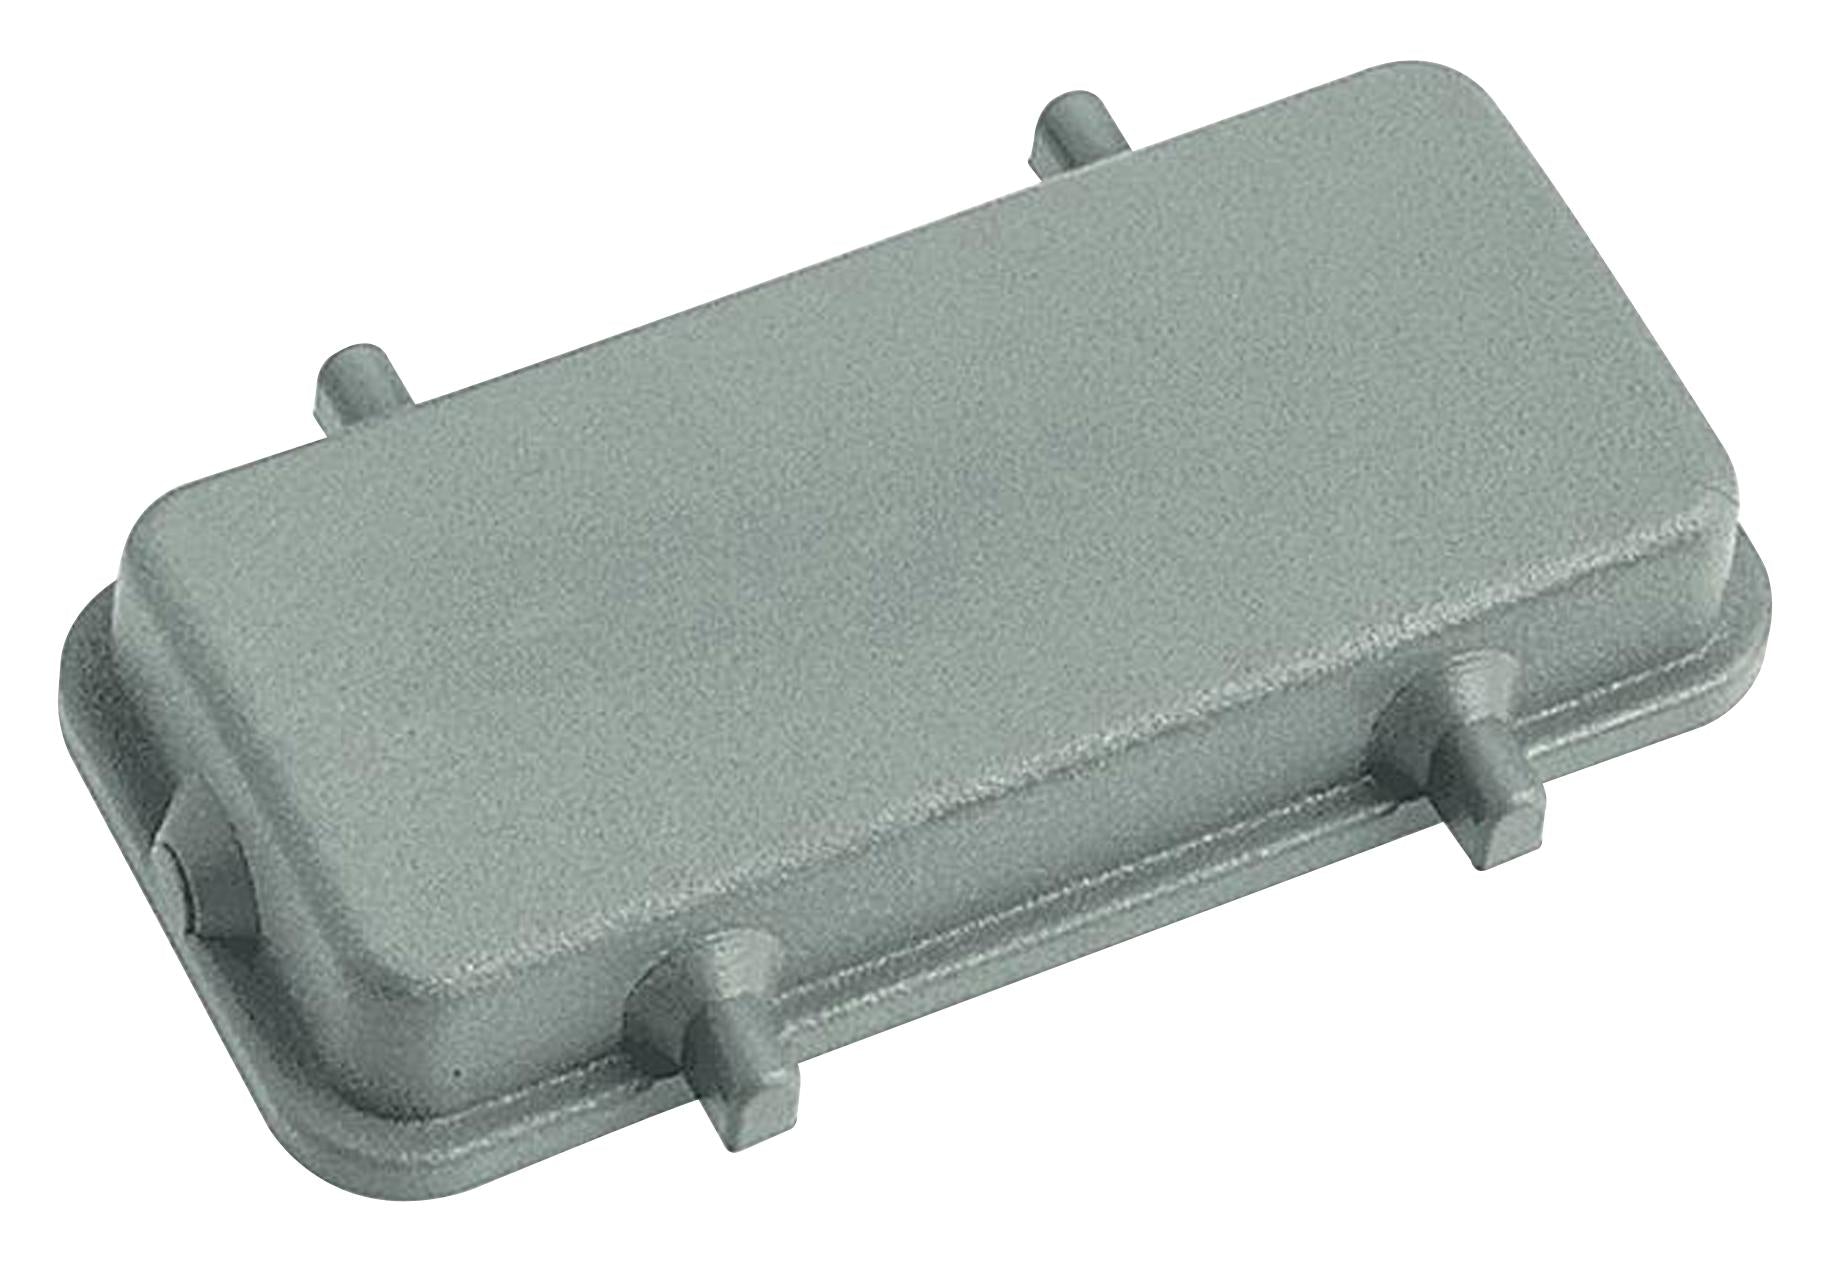 09300245405 PROTECTION COVER, 24B, PLASTIC, 2LEVER HARTING